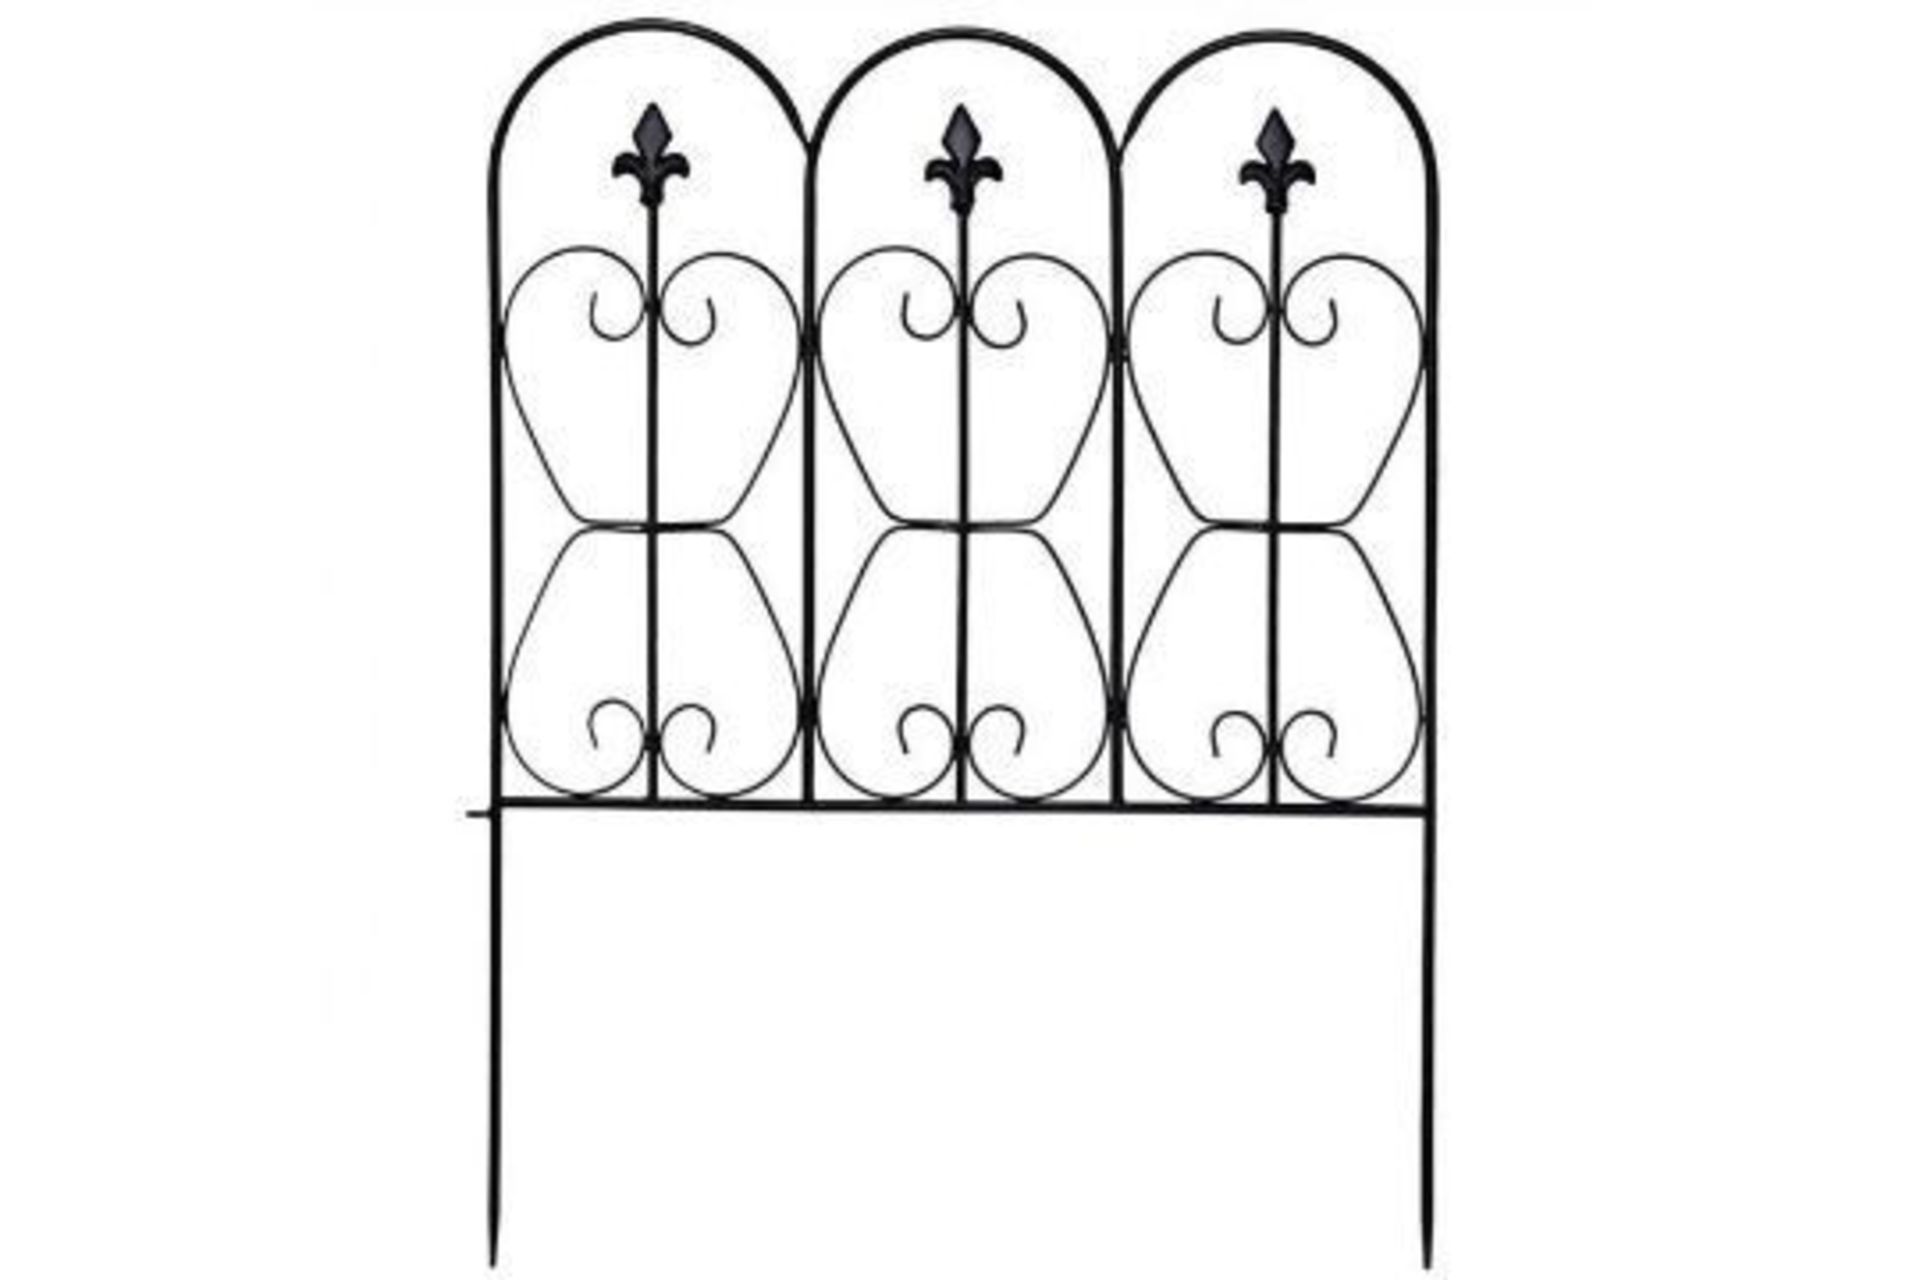 Garden Fencing Panels for Decoration with Arched and Inter-lockable Design. - R14.2